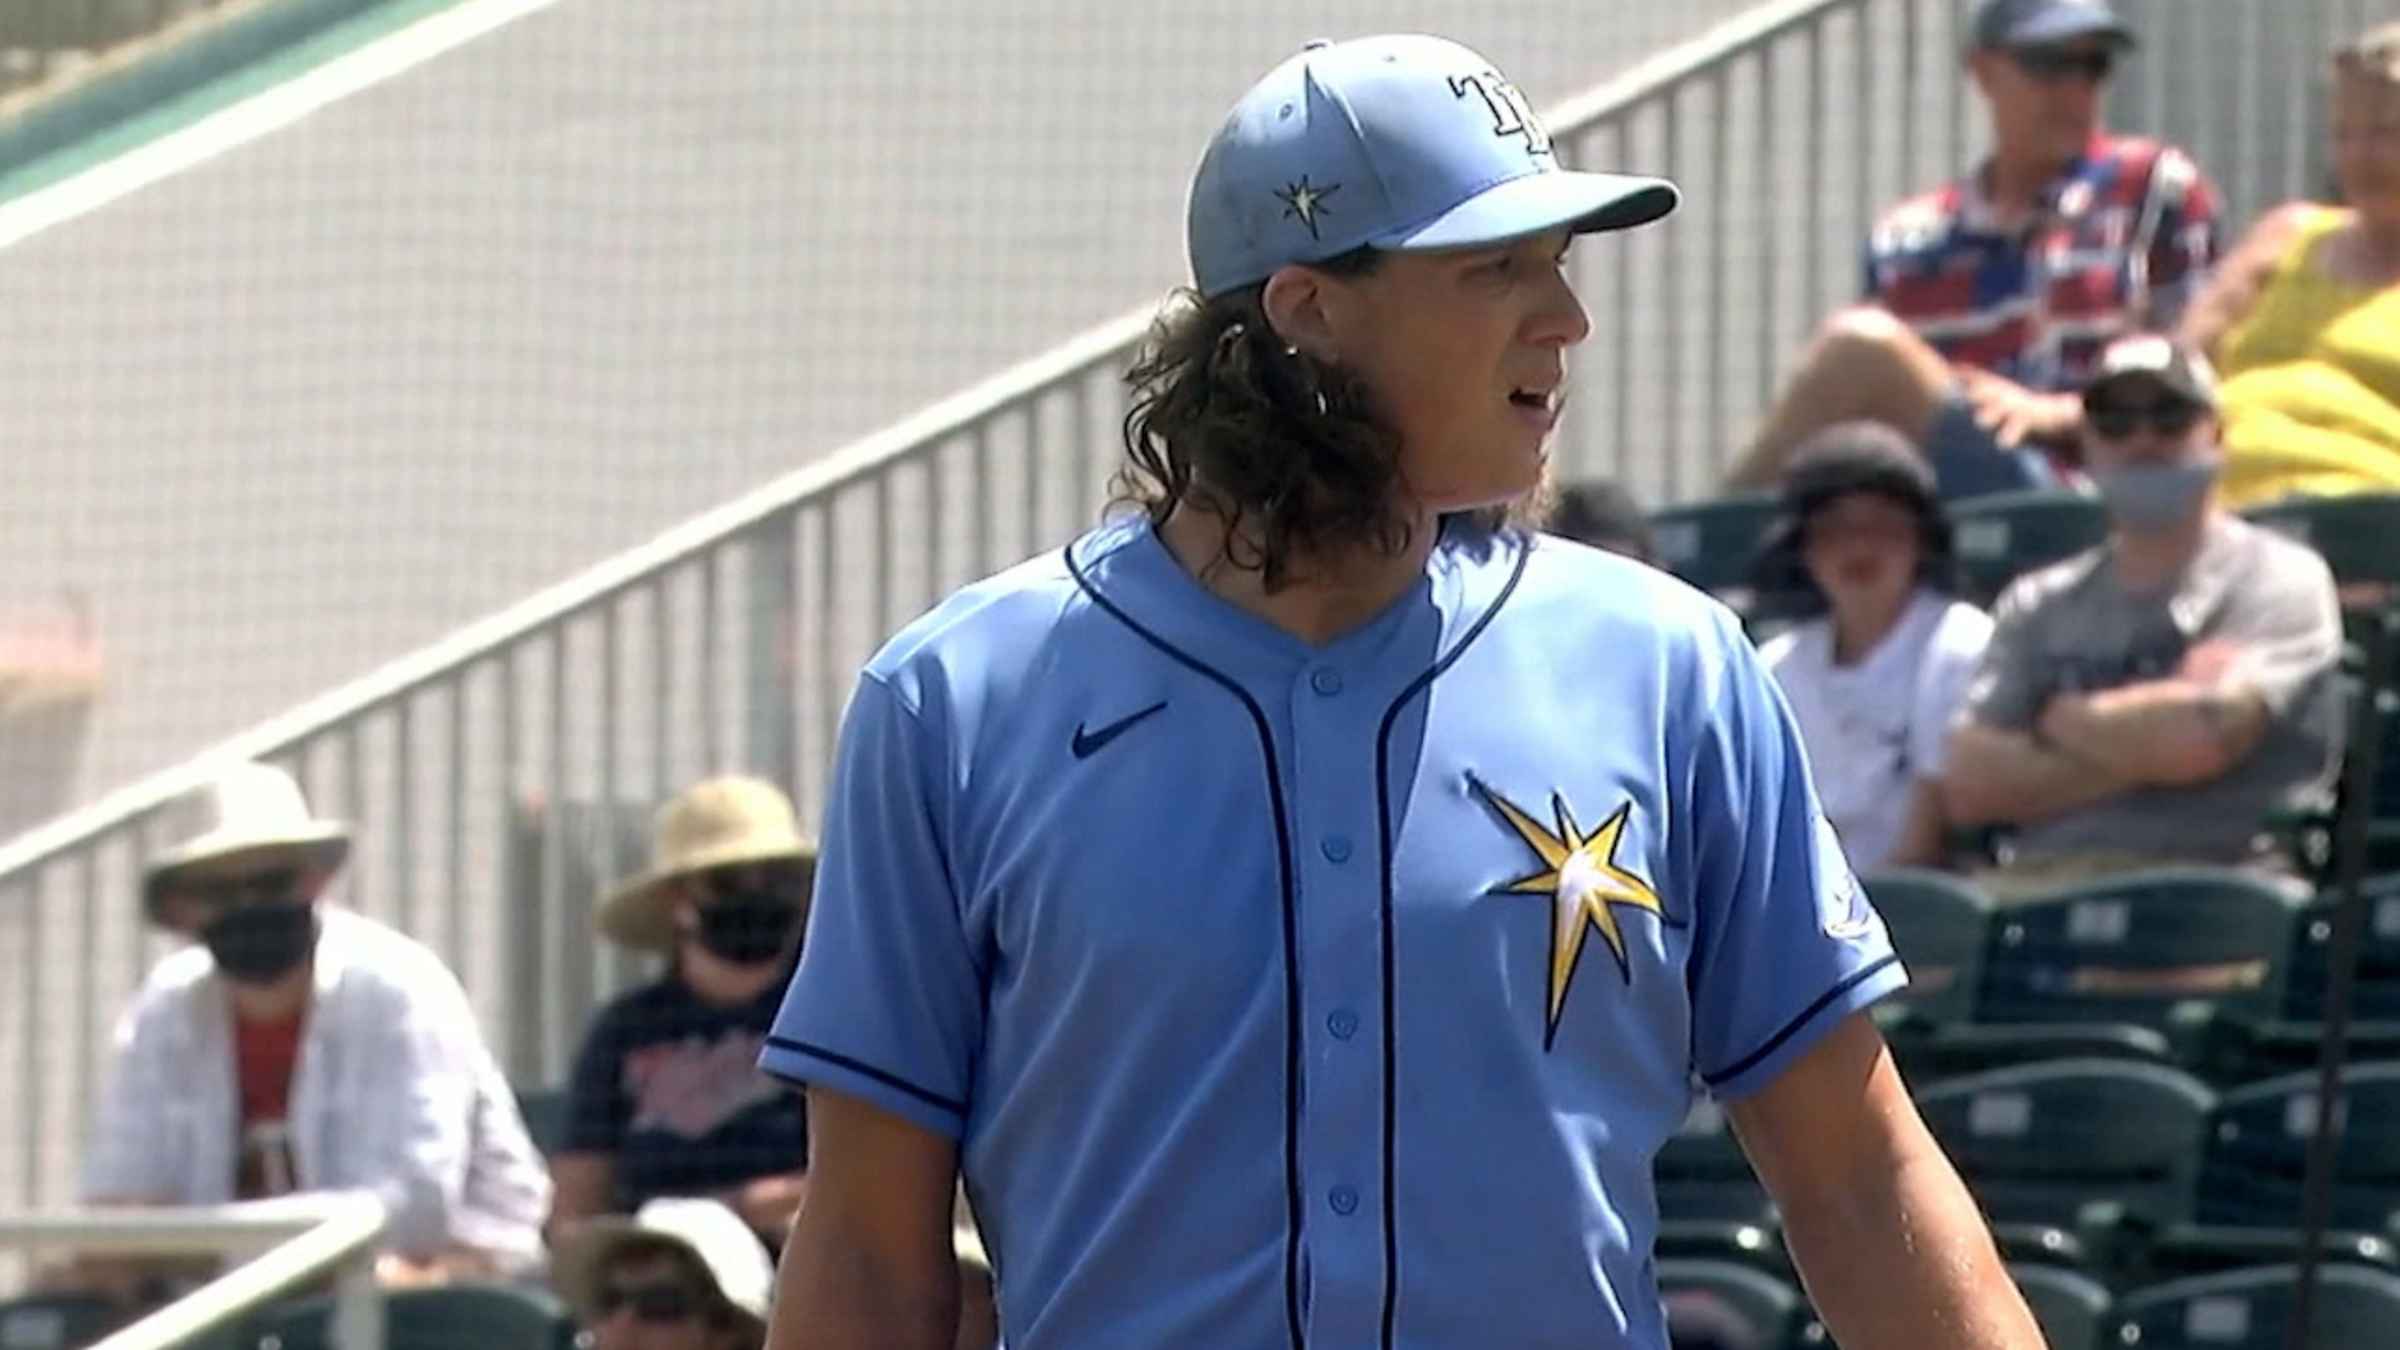 Tyler Glasnow strikes out 7 ahead of playoff start